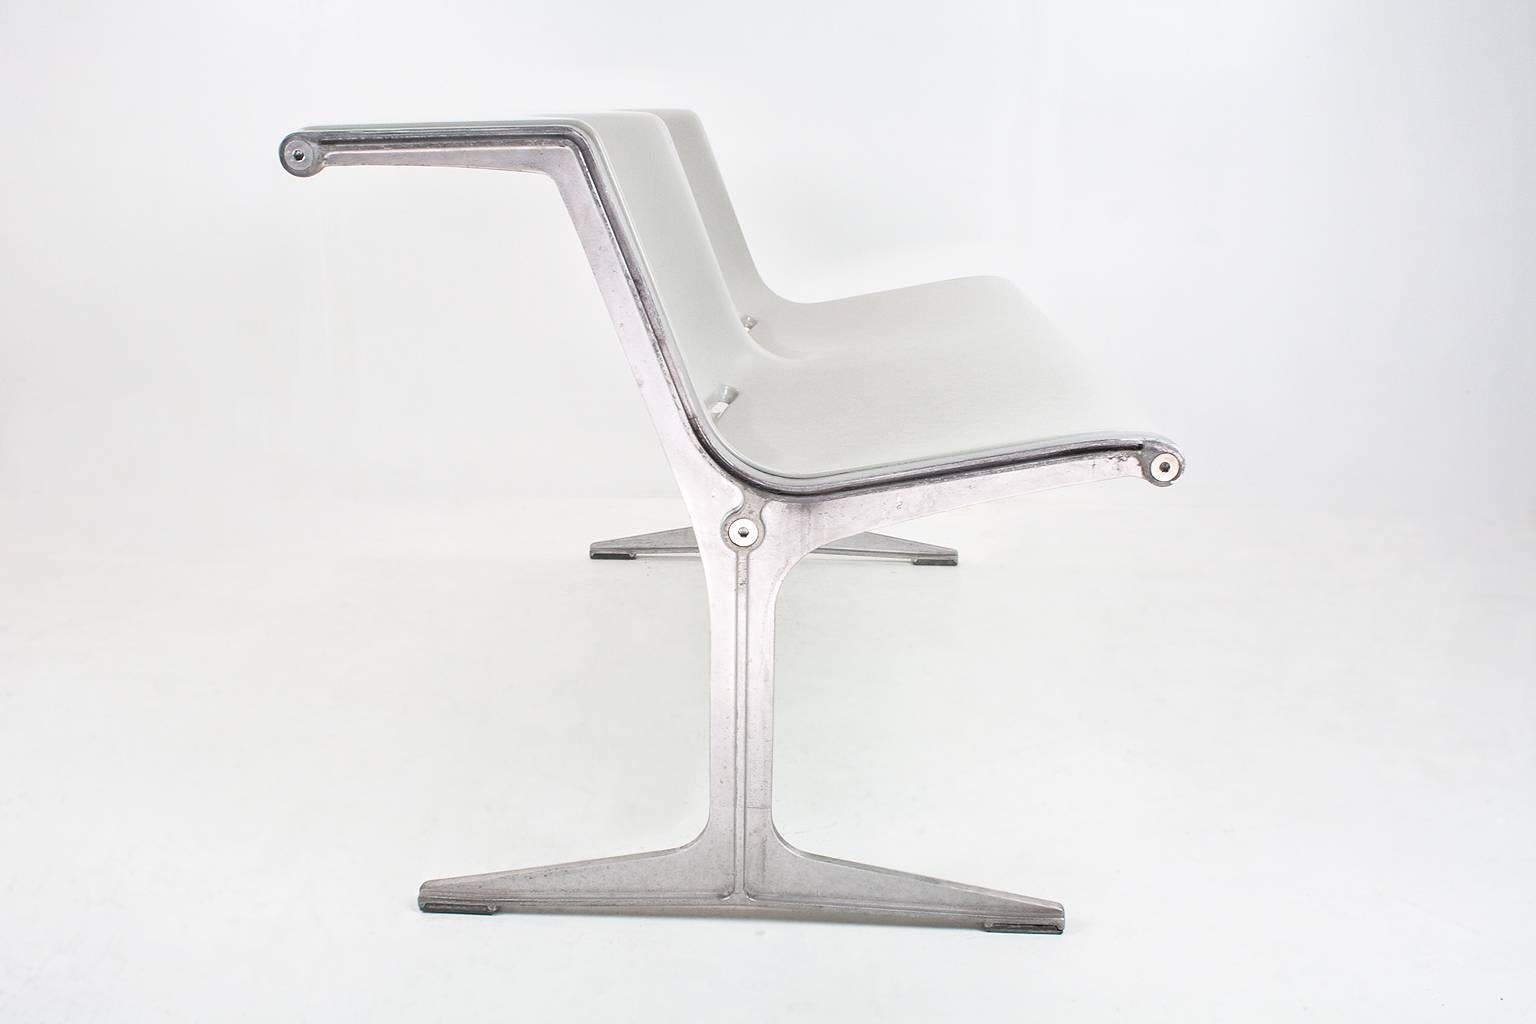 Friso Kramer designed this 1200 series two-seat in 1967 for Wilkhahn Germany, which became one of Wilkhahn’s most iconic products for public spaces. 

The 1200 series is linkable. It has a slender aluminium frame. The benches can be linked together